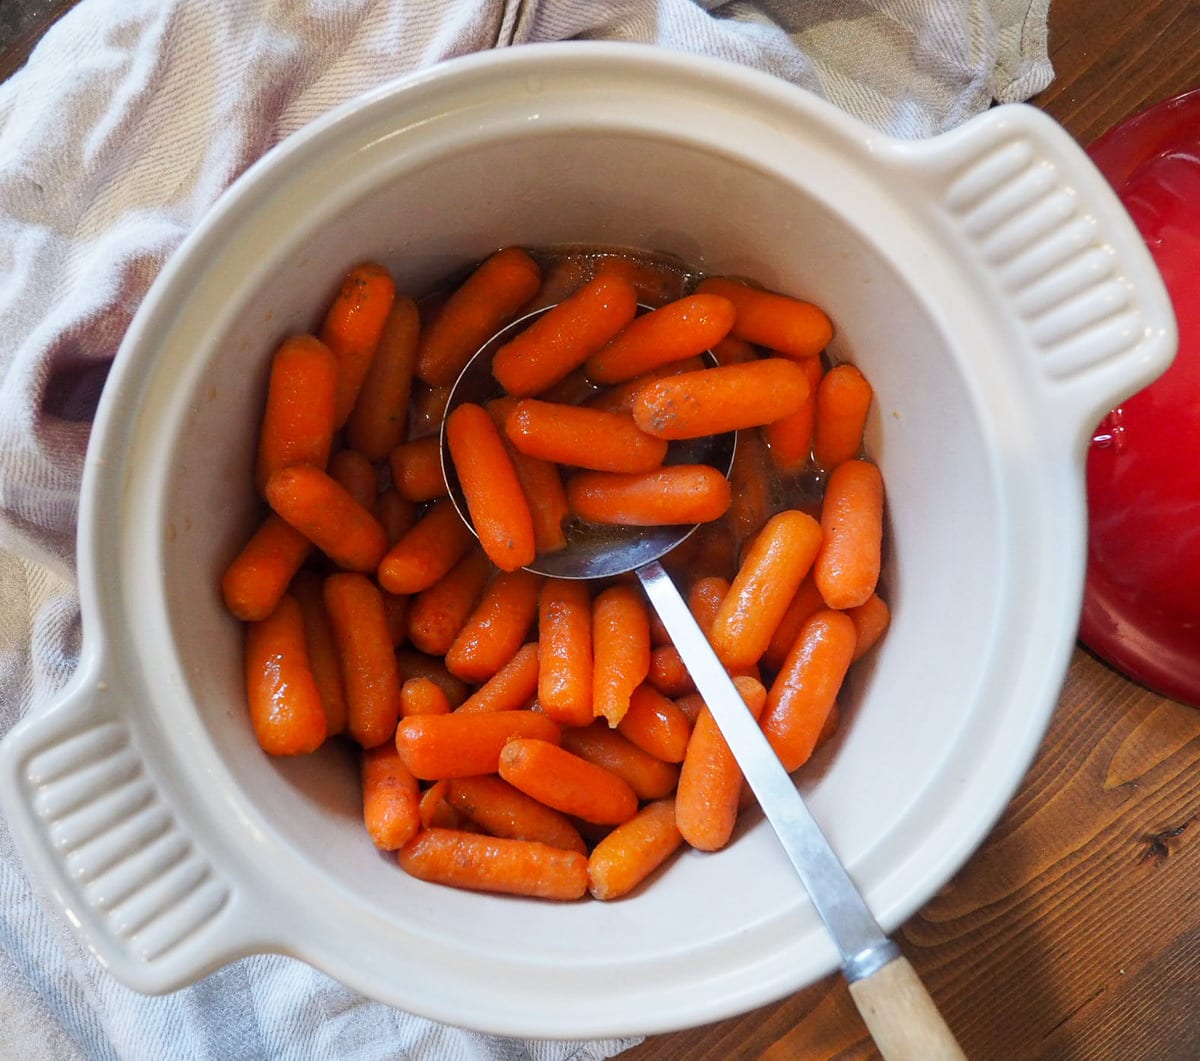 Glazed carrots in a white serving dish with a serving spoon.